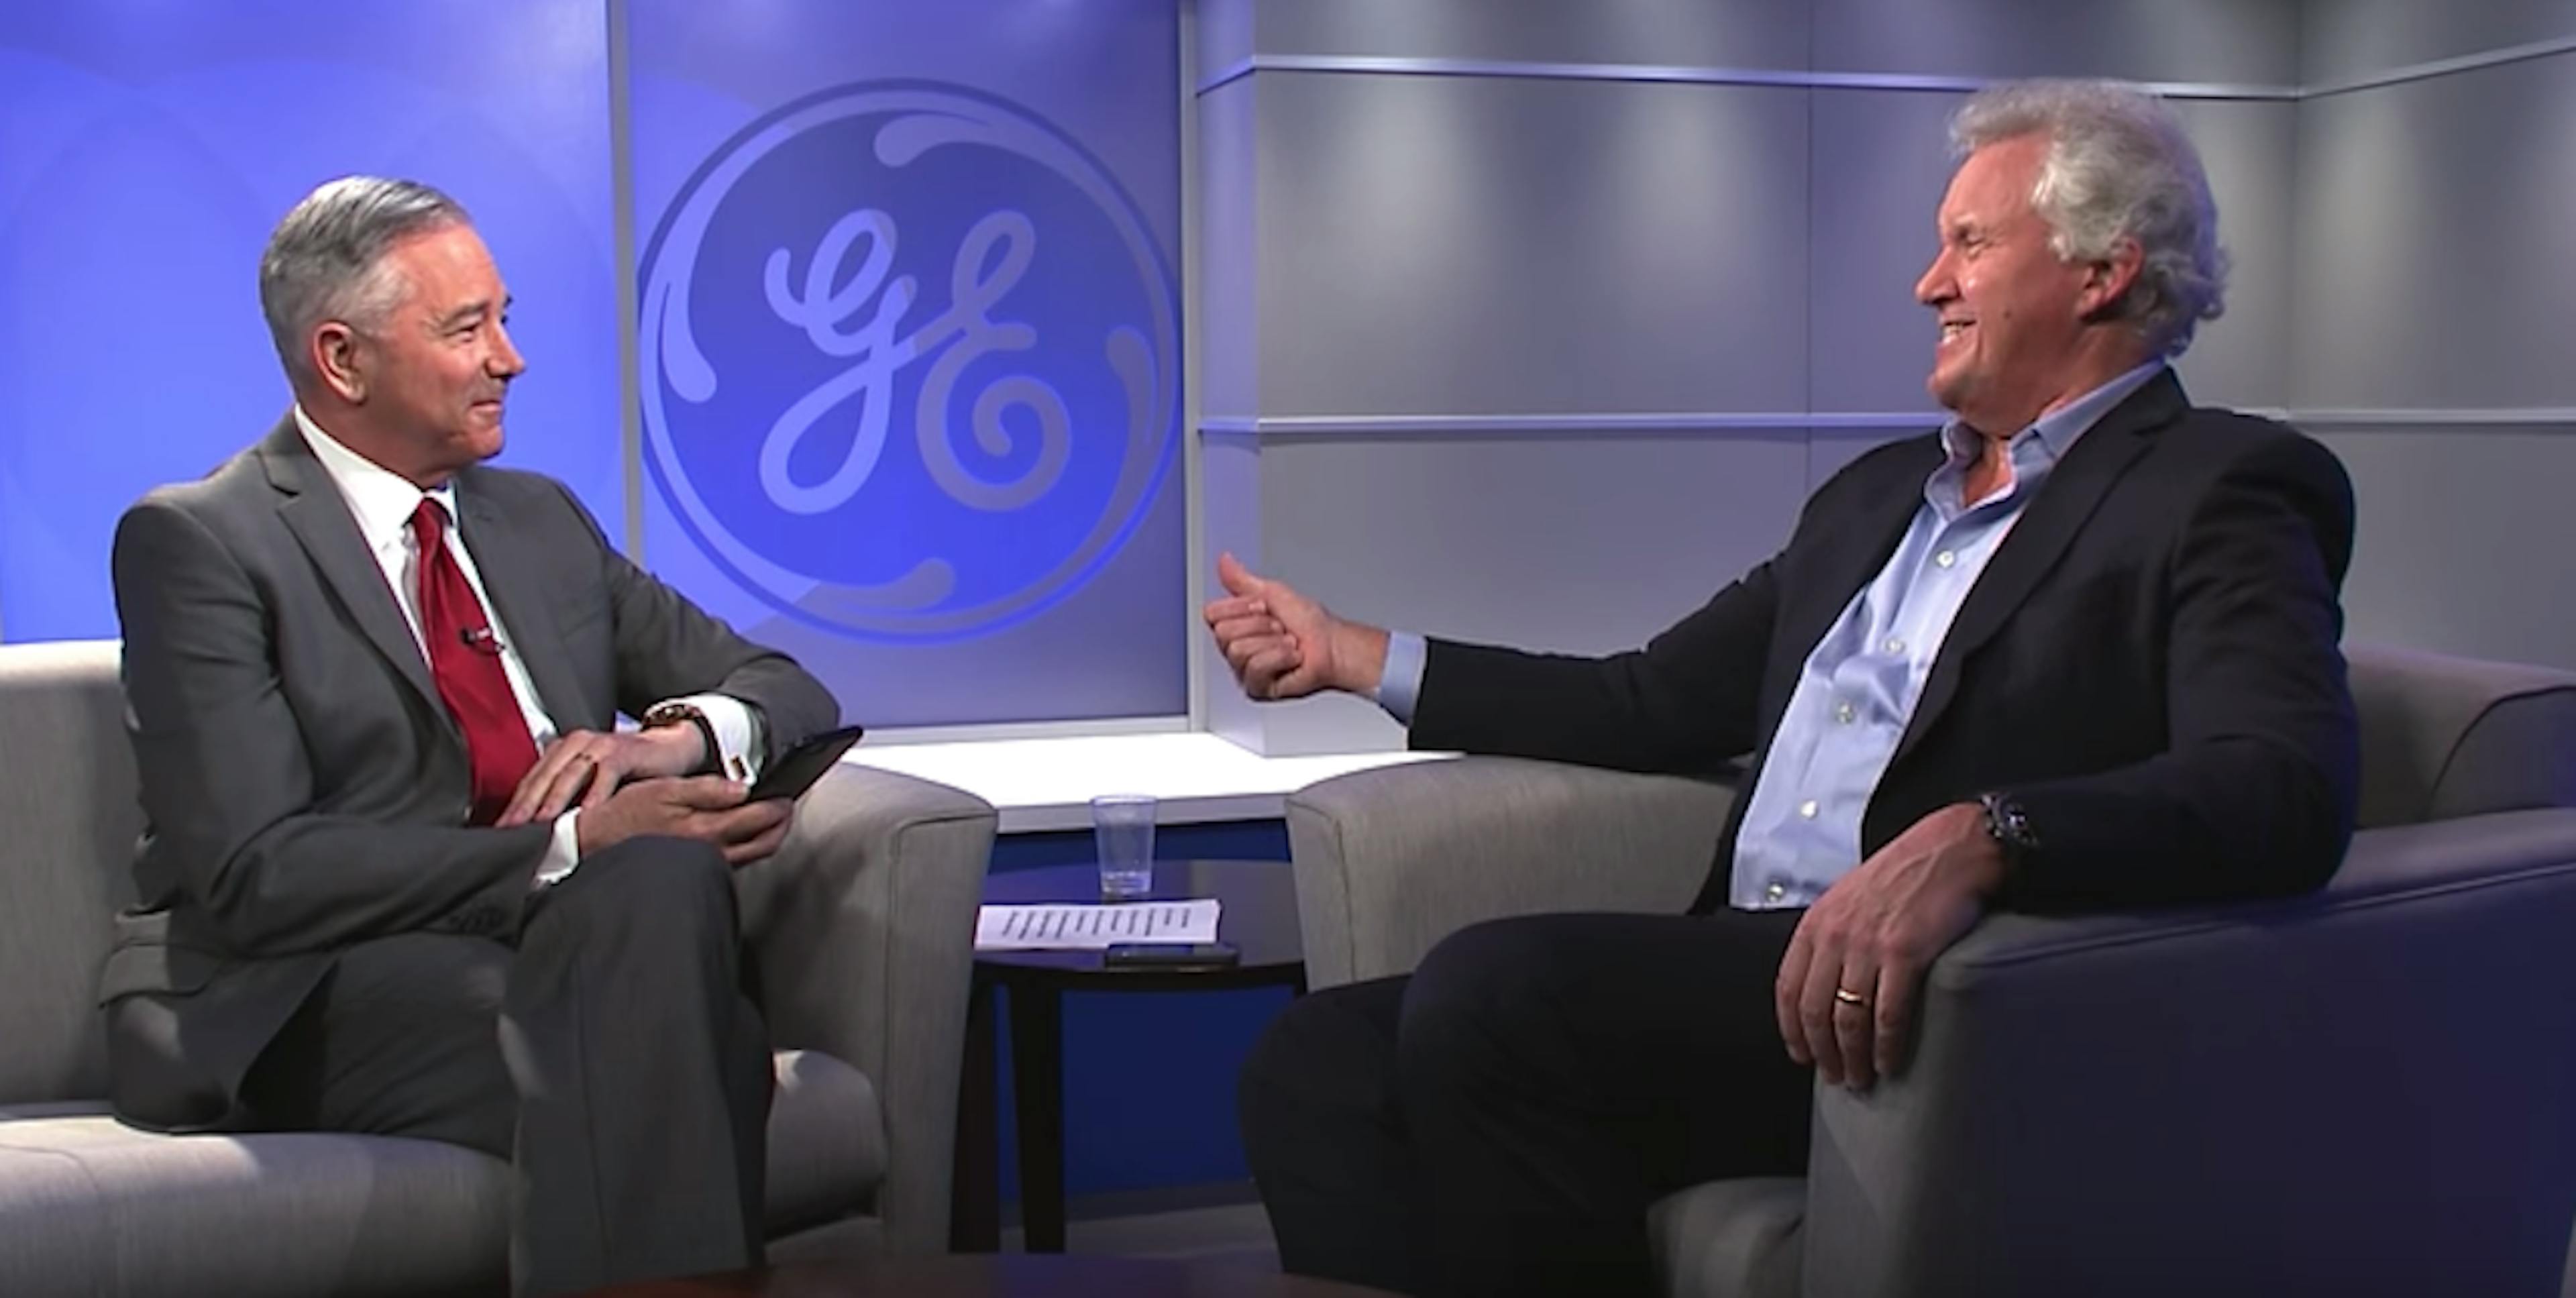 featured image - Interview with GE’s Jeff Immelt: 5 ways leaders develop authentic teams